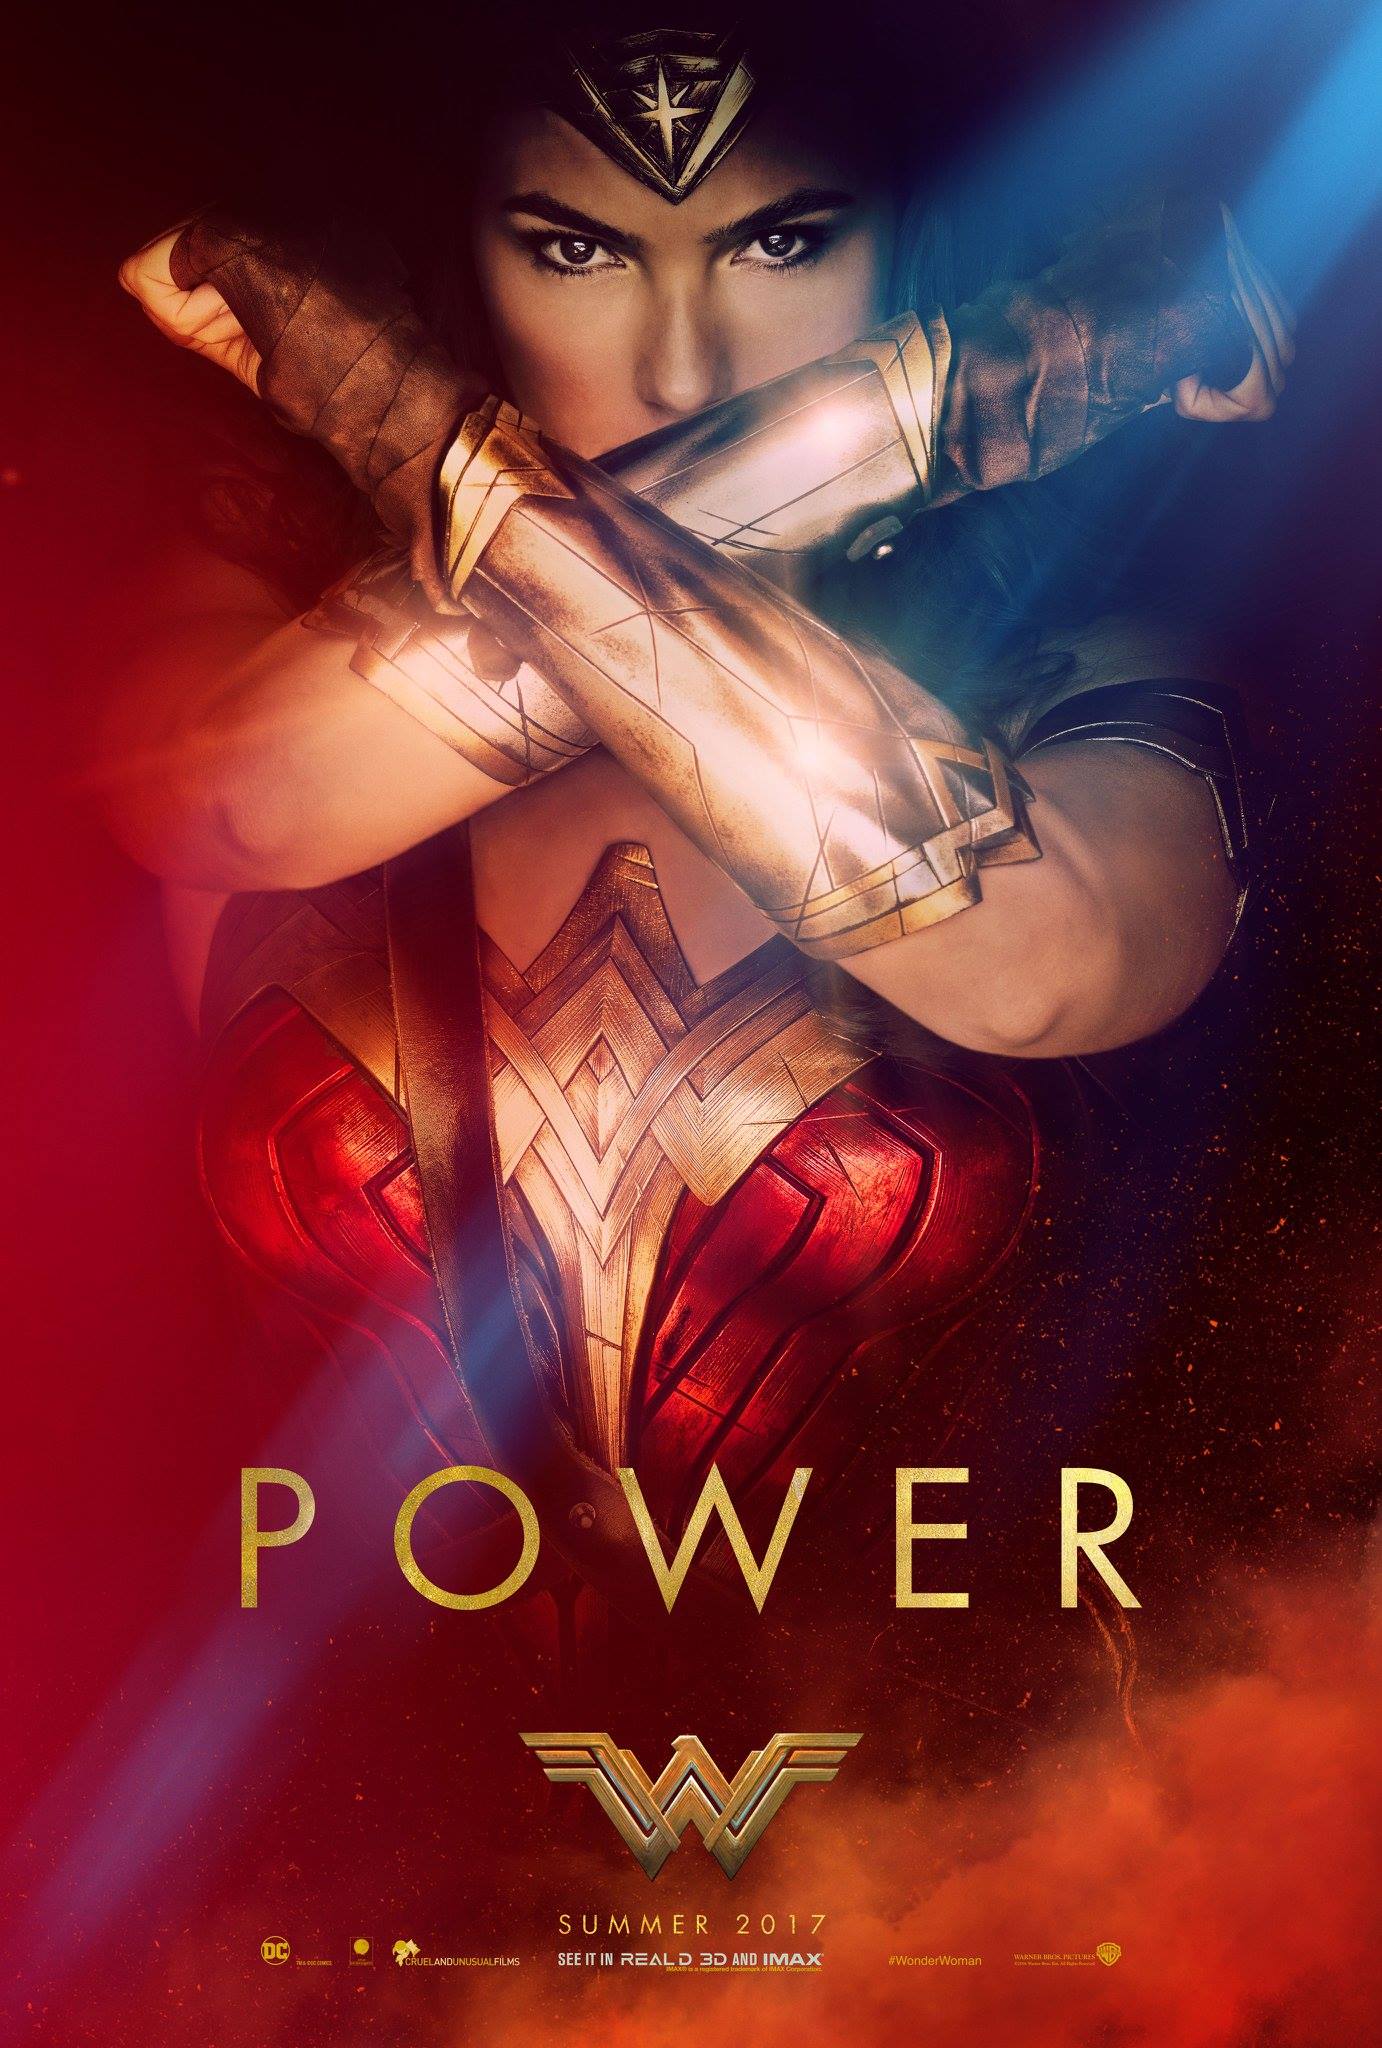 New Wonder Woman Movie Trailer and Posters